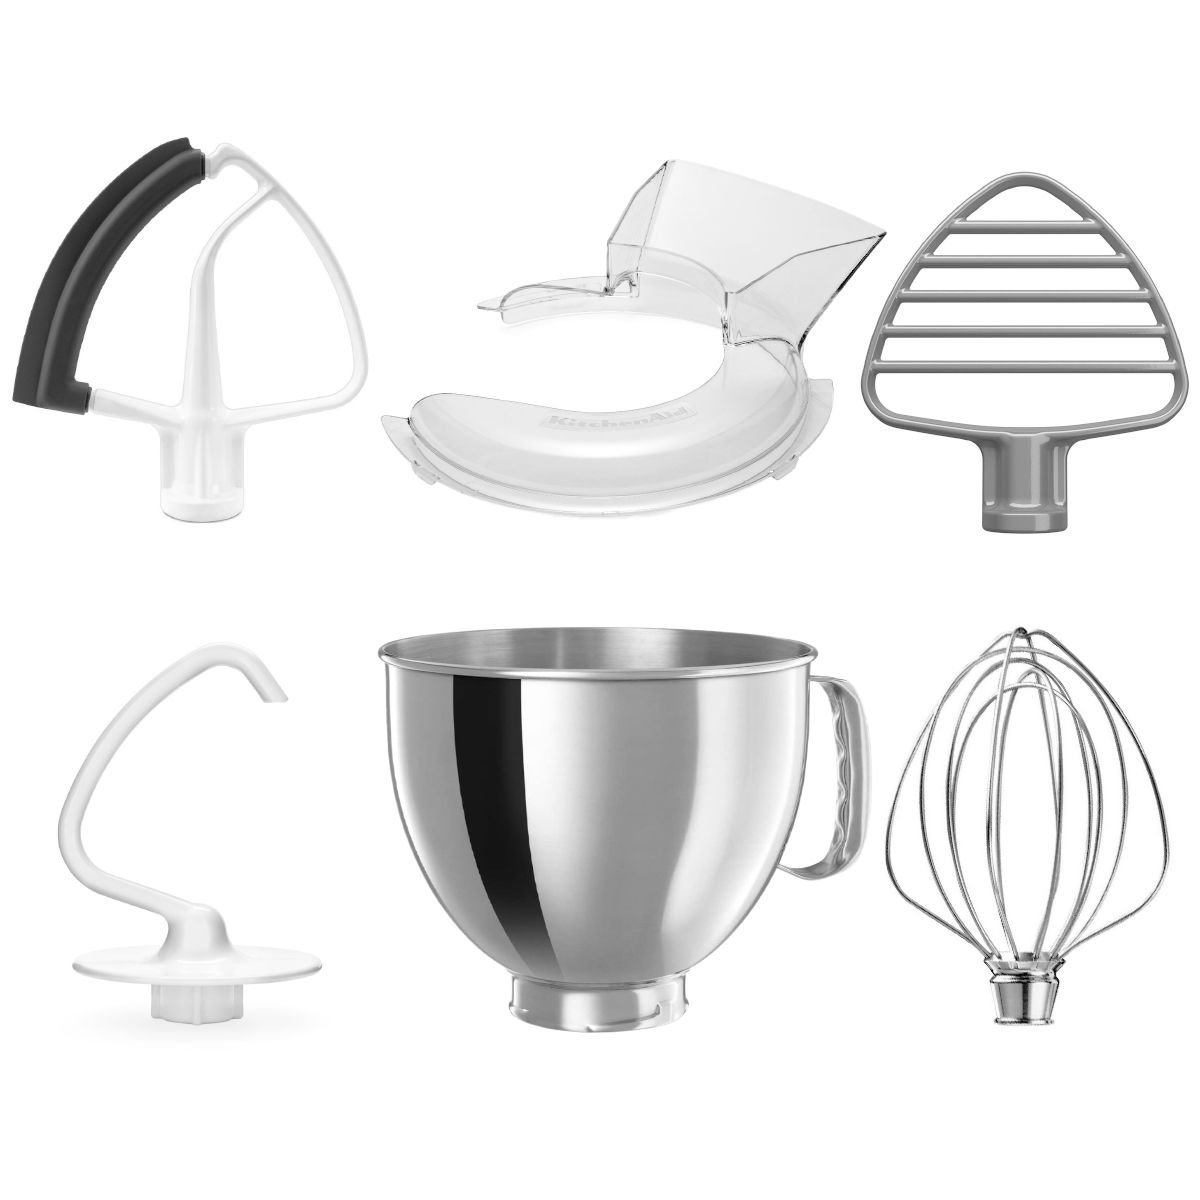 Electric Mixer Accessories Universal Pouring Chute Pouring Guard